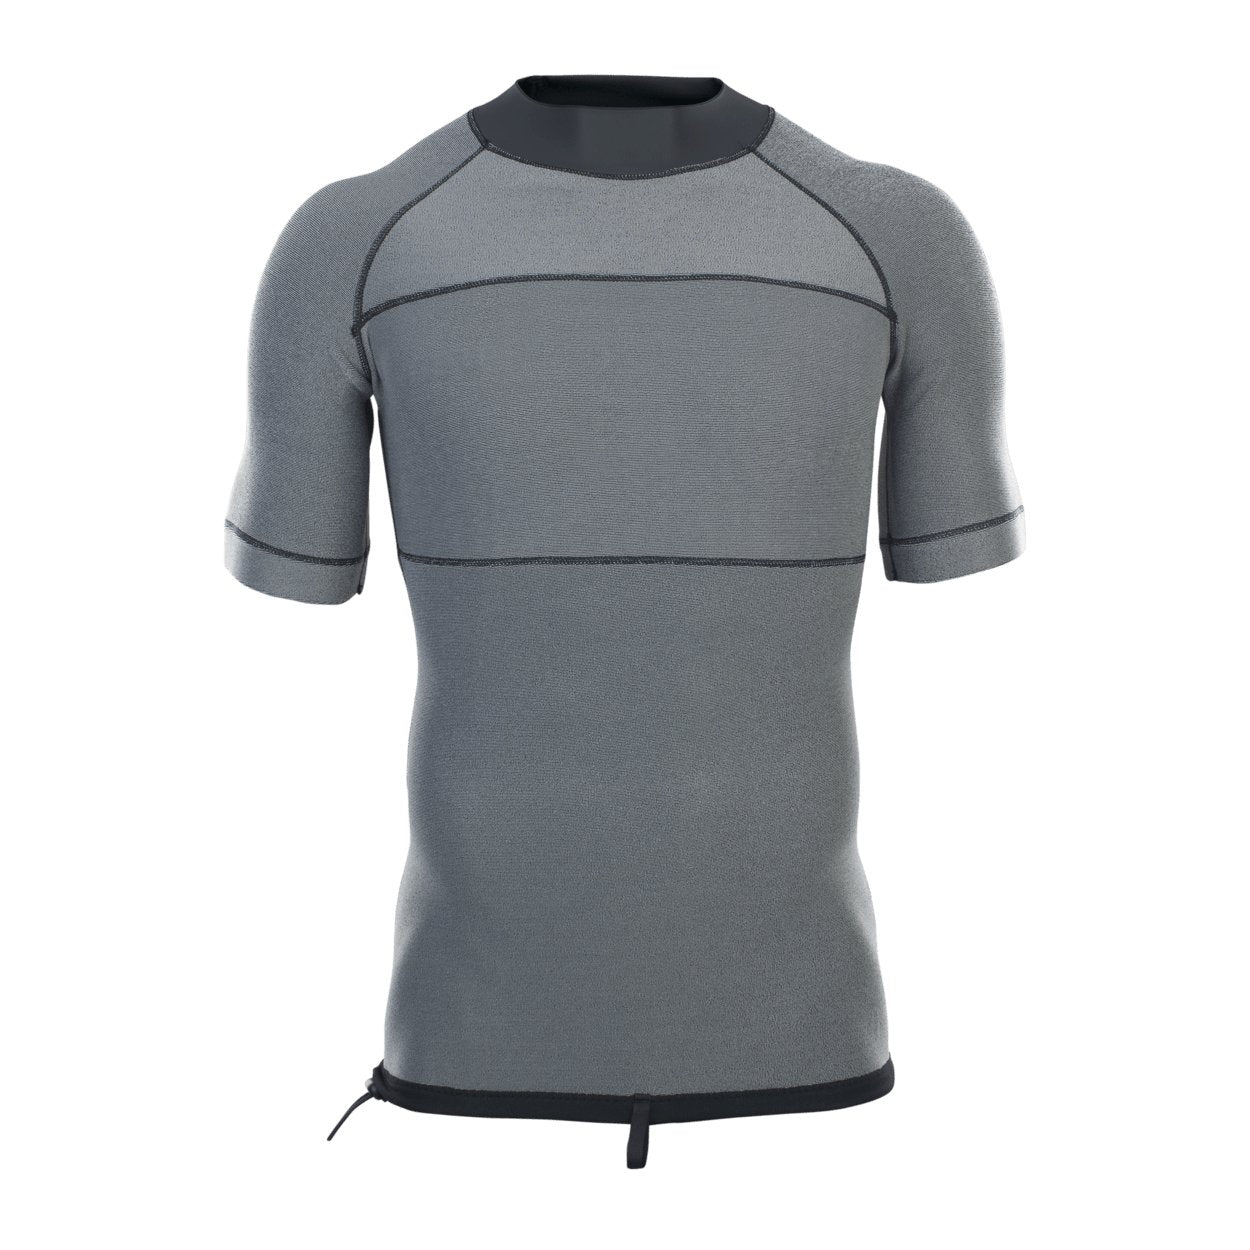 ION Neo Top 0.5 SS men 2023 - Worthing Watersports - 9010583091860 - Tops - ION Water